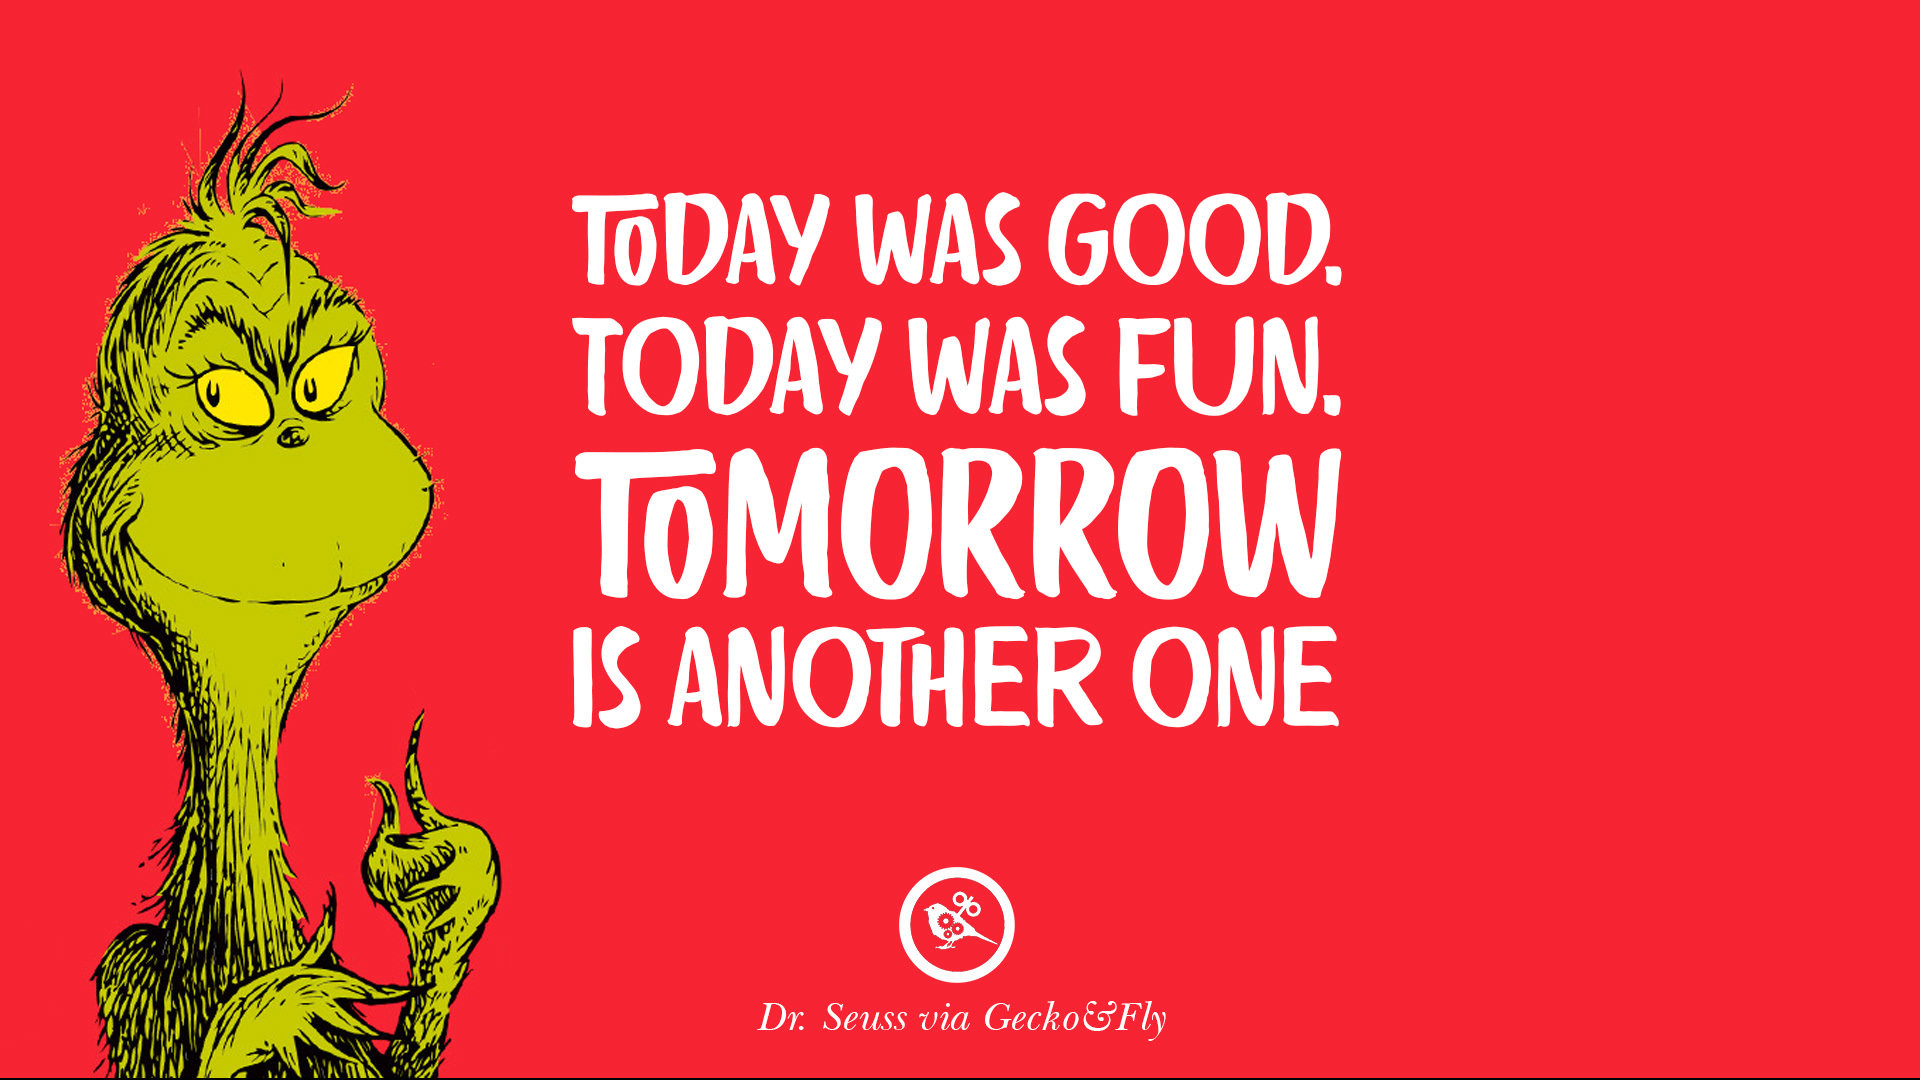 1920x1080 Today was good. Today was fun. Tomorrow is another one. – Dr Seuss